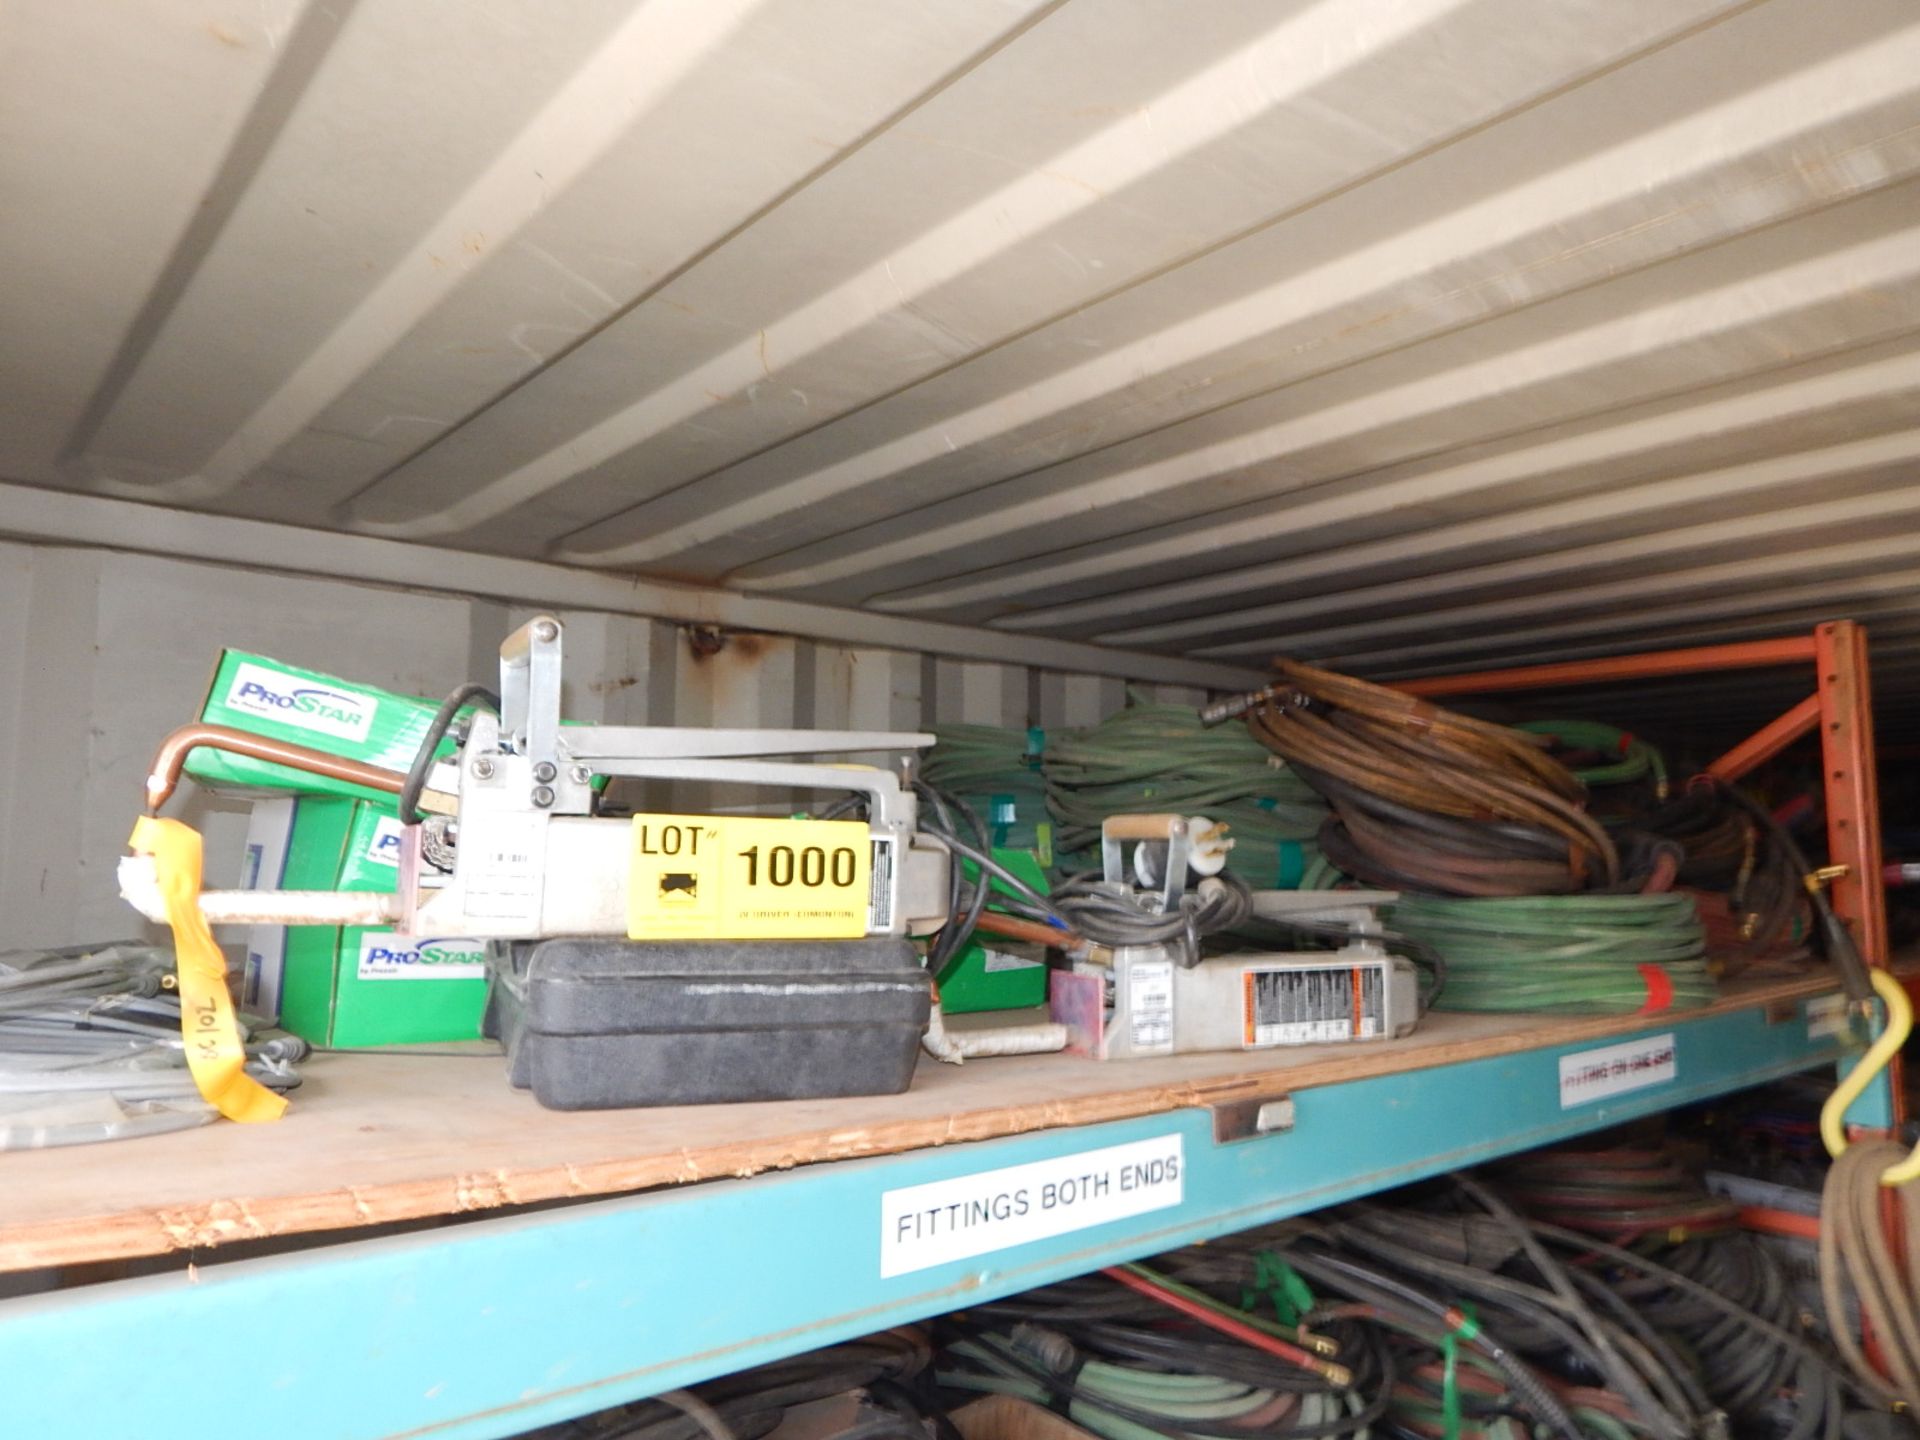 LOT/ CONTENTS OF SHELF CONSISTING OF SPOT WELDERS AND WELDING HOSES (SC 520) - Image 2 of 3